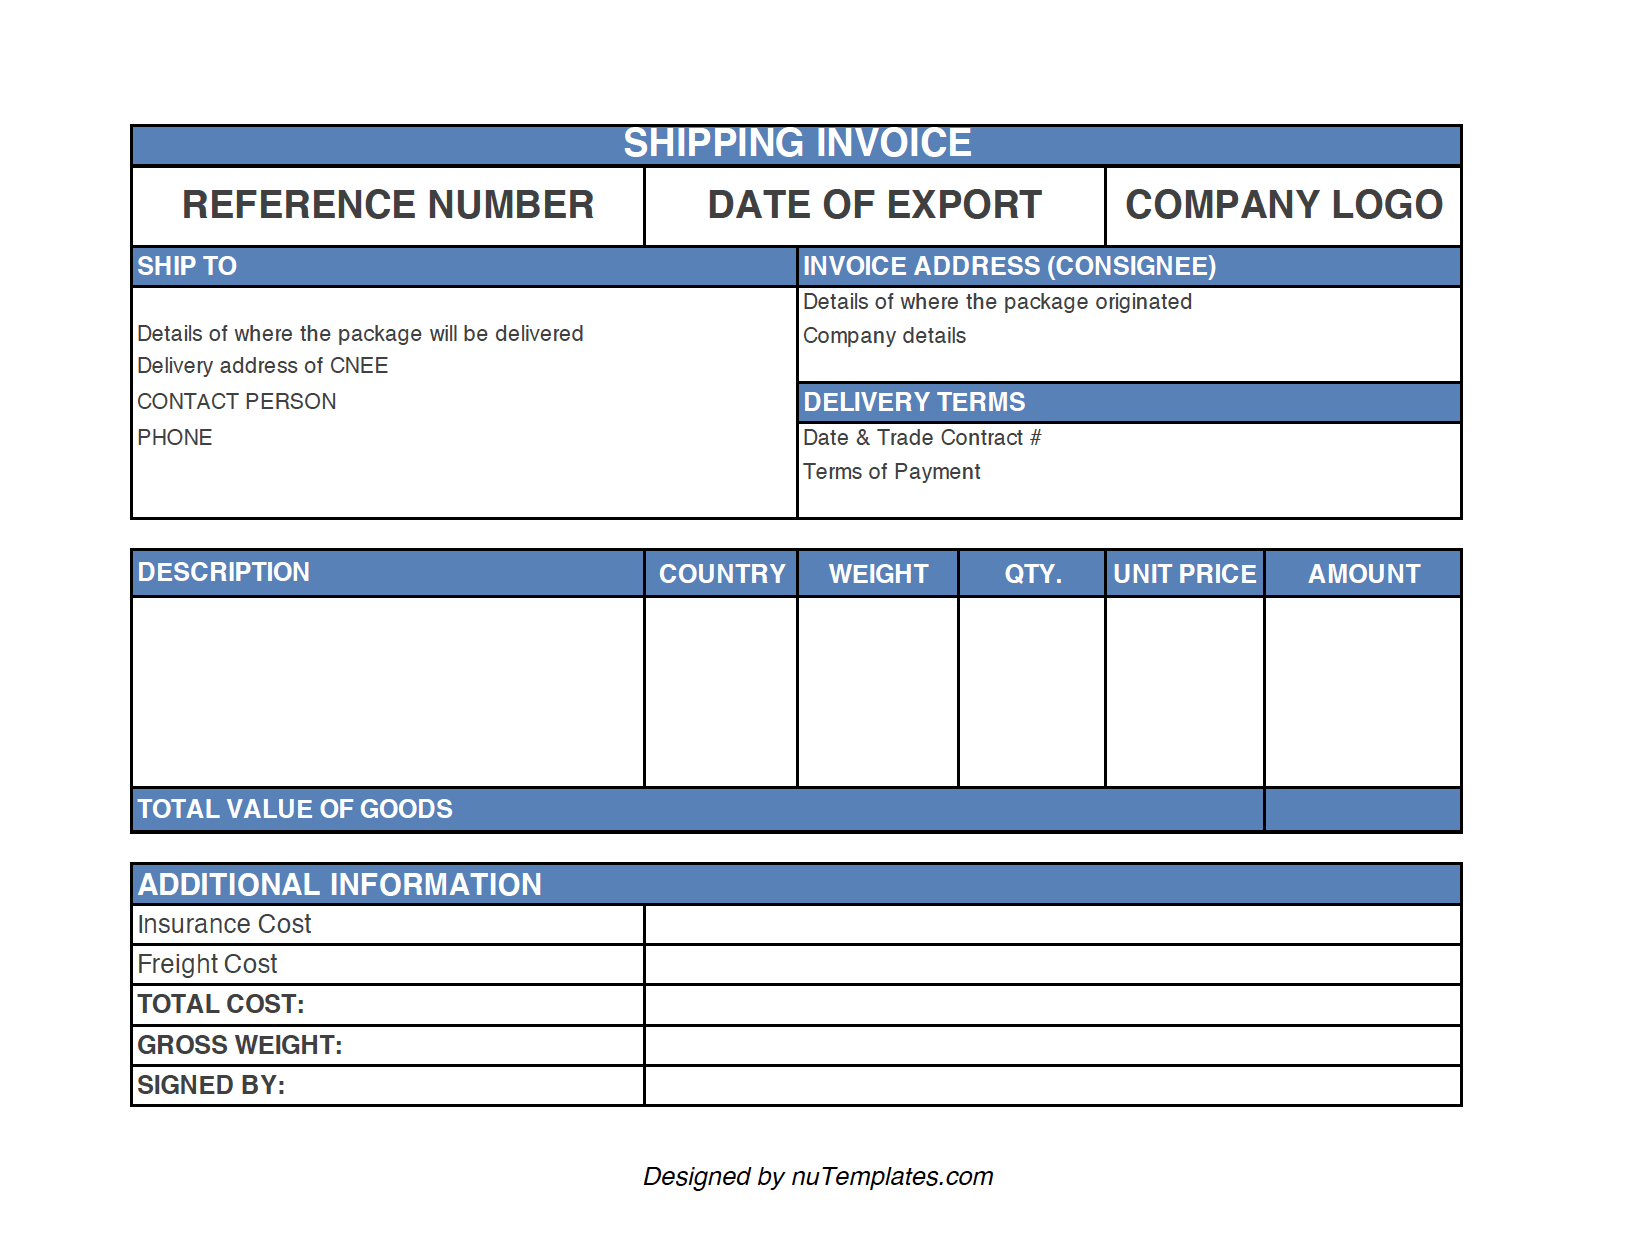 shipping-invoice-template